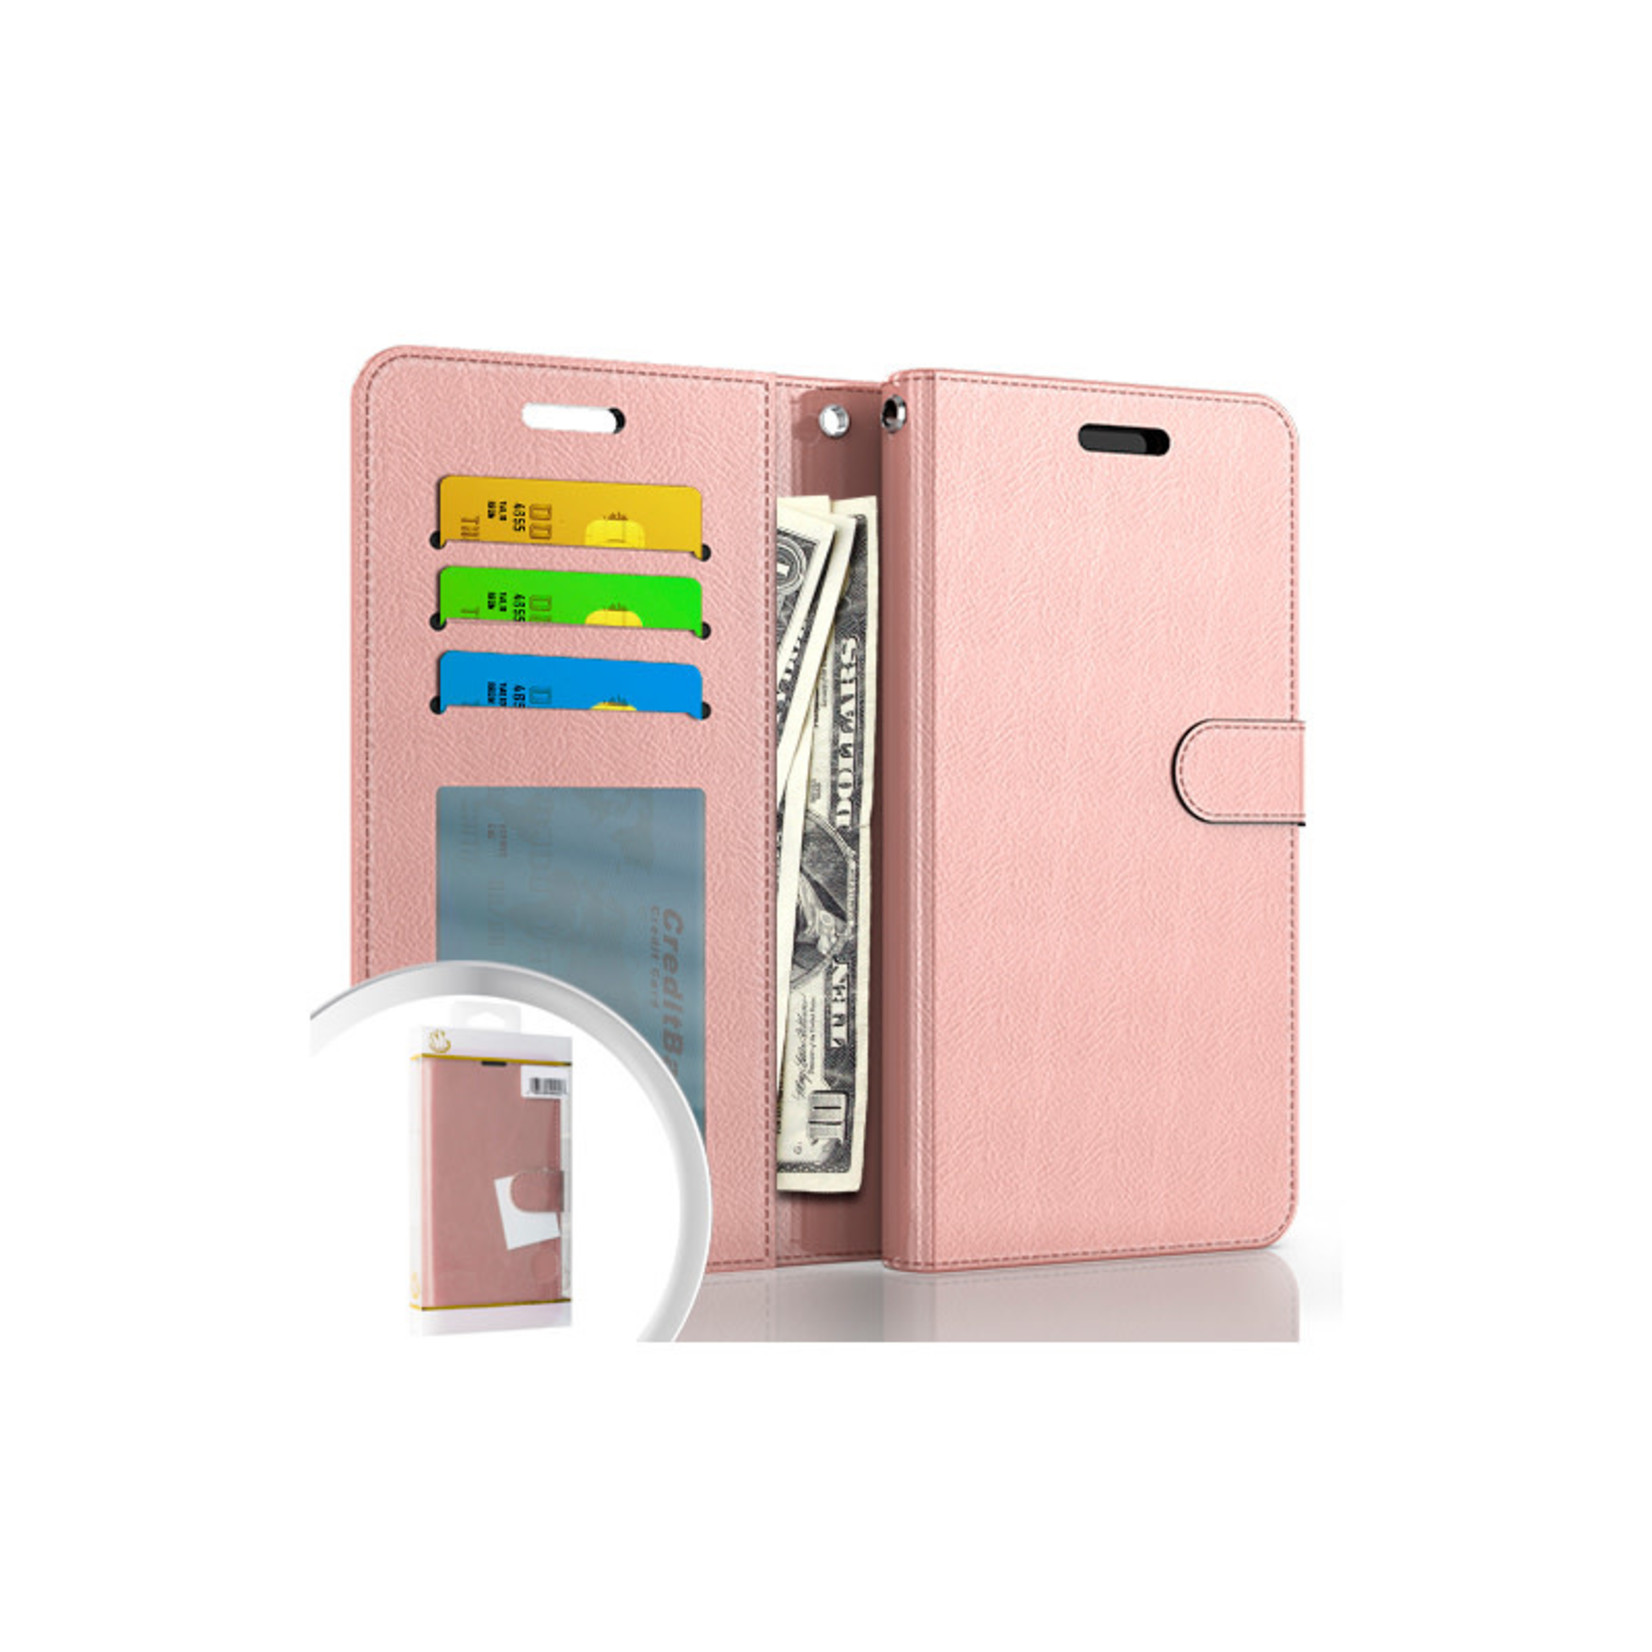 Hybrid PU Leather Flip Cover Case Wallet with Credit Card Slots for iPhone 13